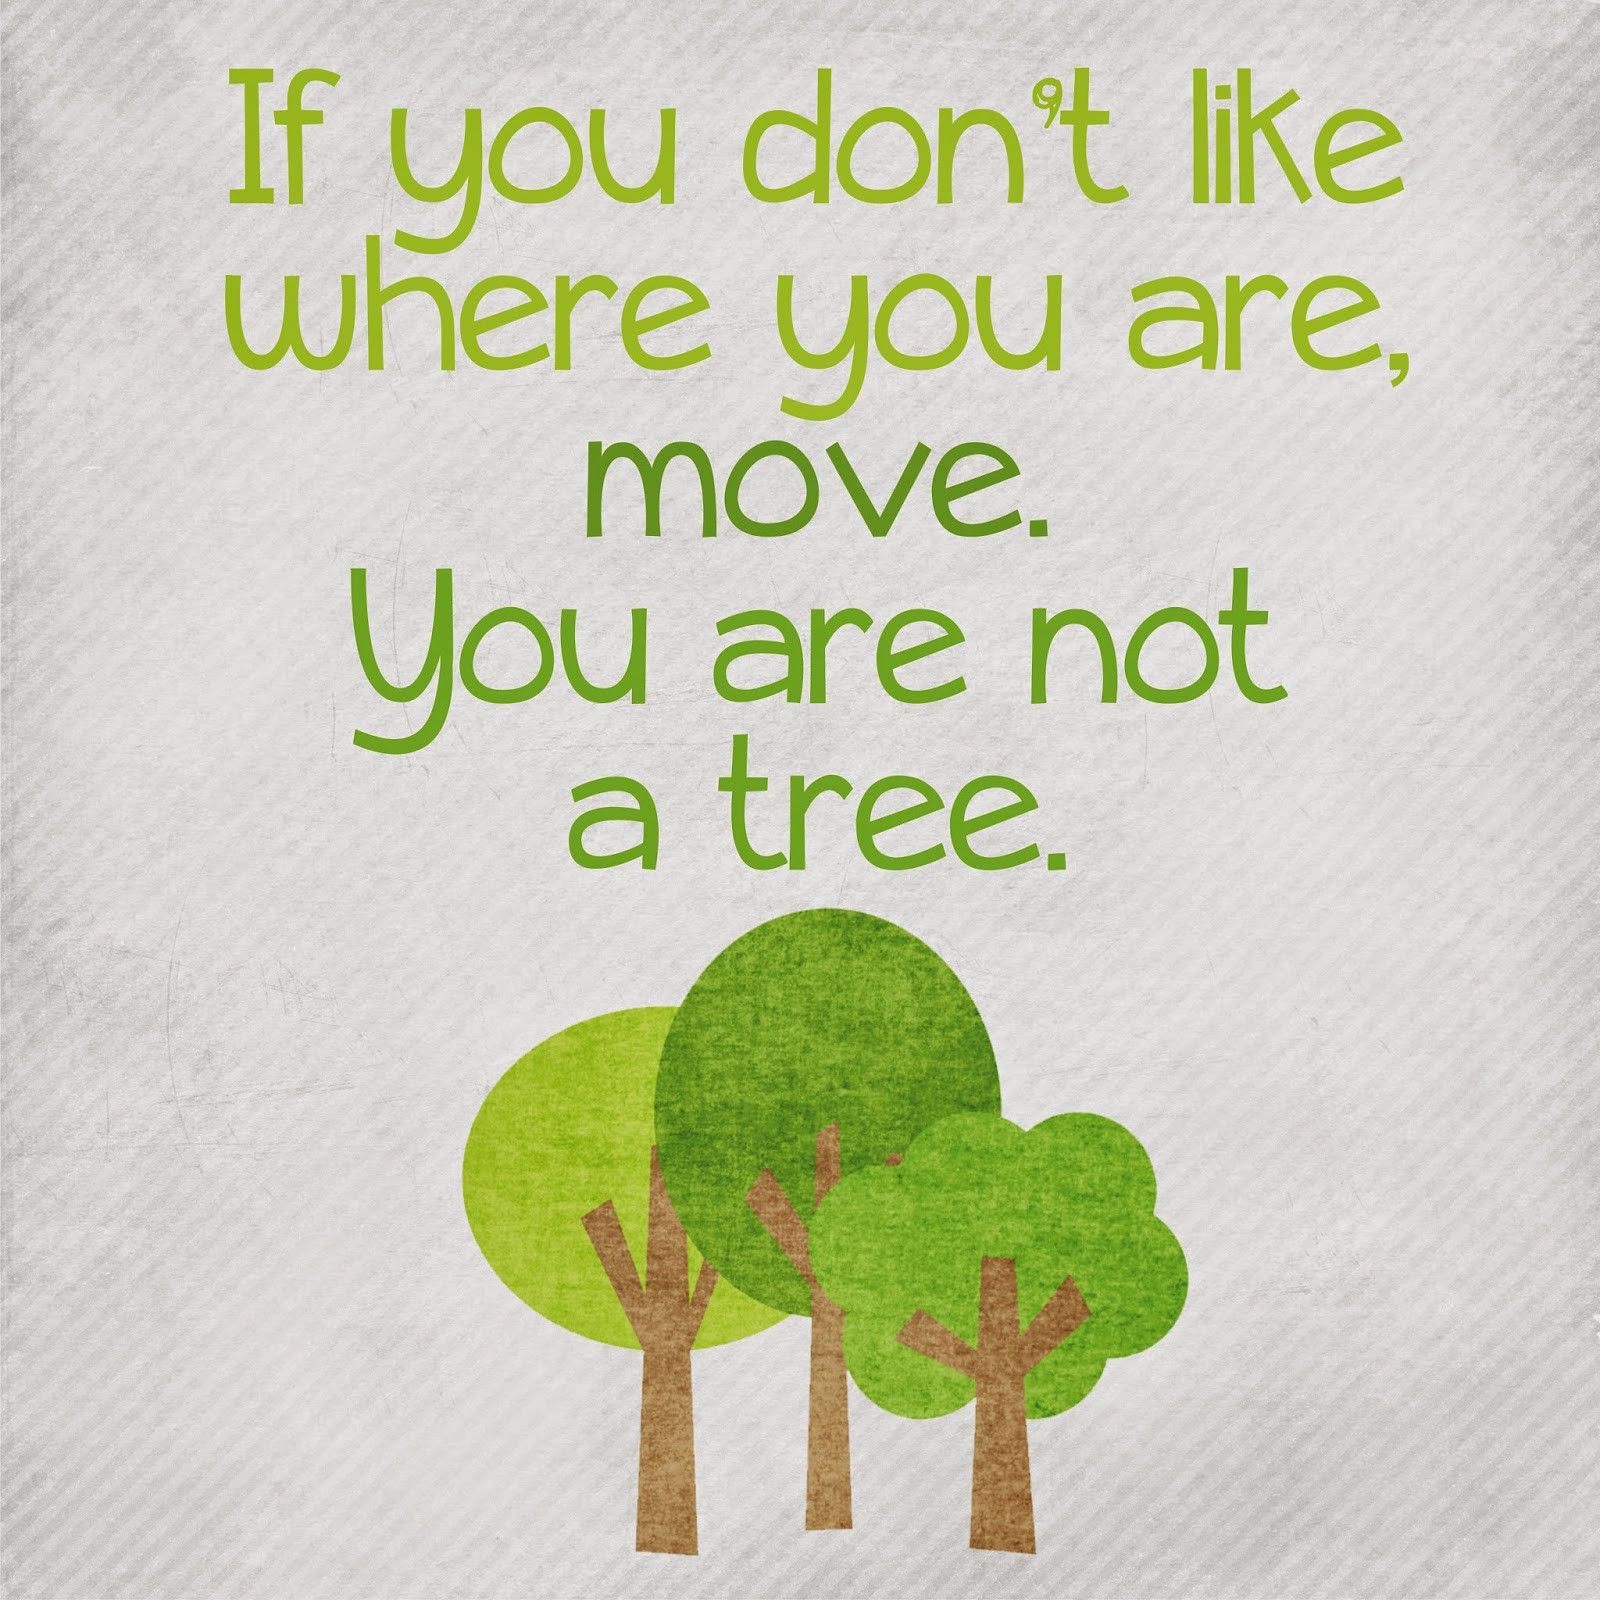 You're not a tree. Move!